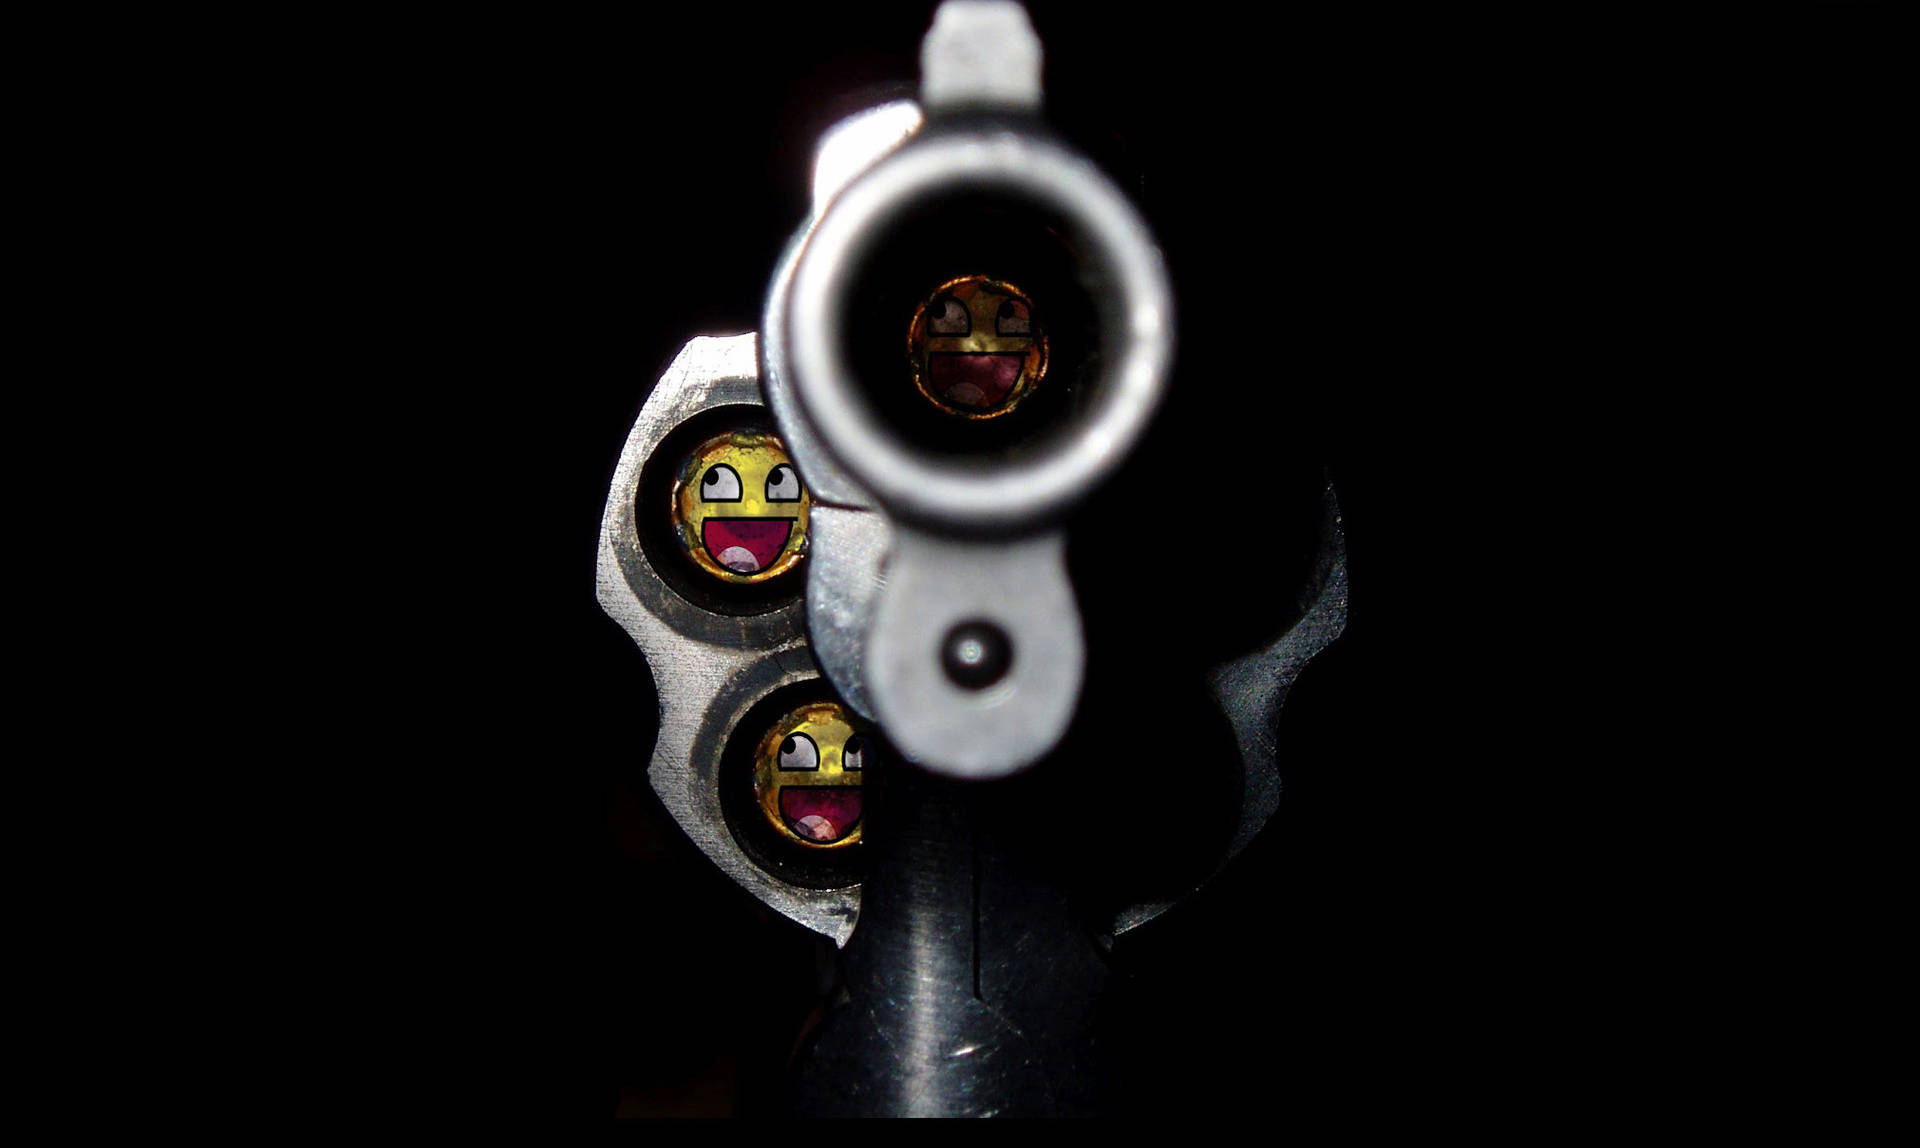 Gun With Epic Smiley Face Bullets Meme Background